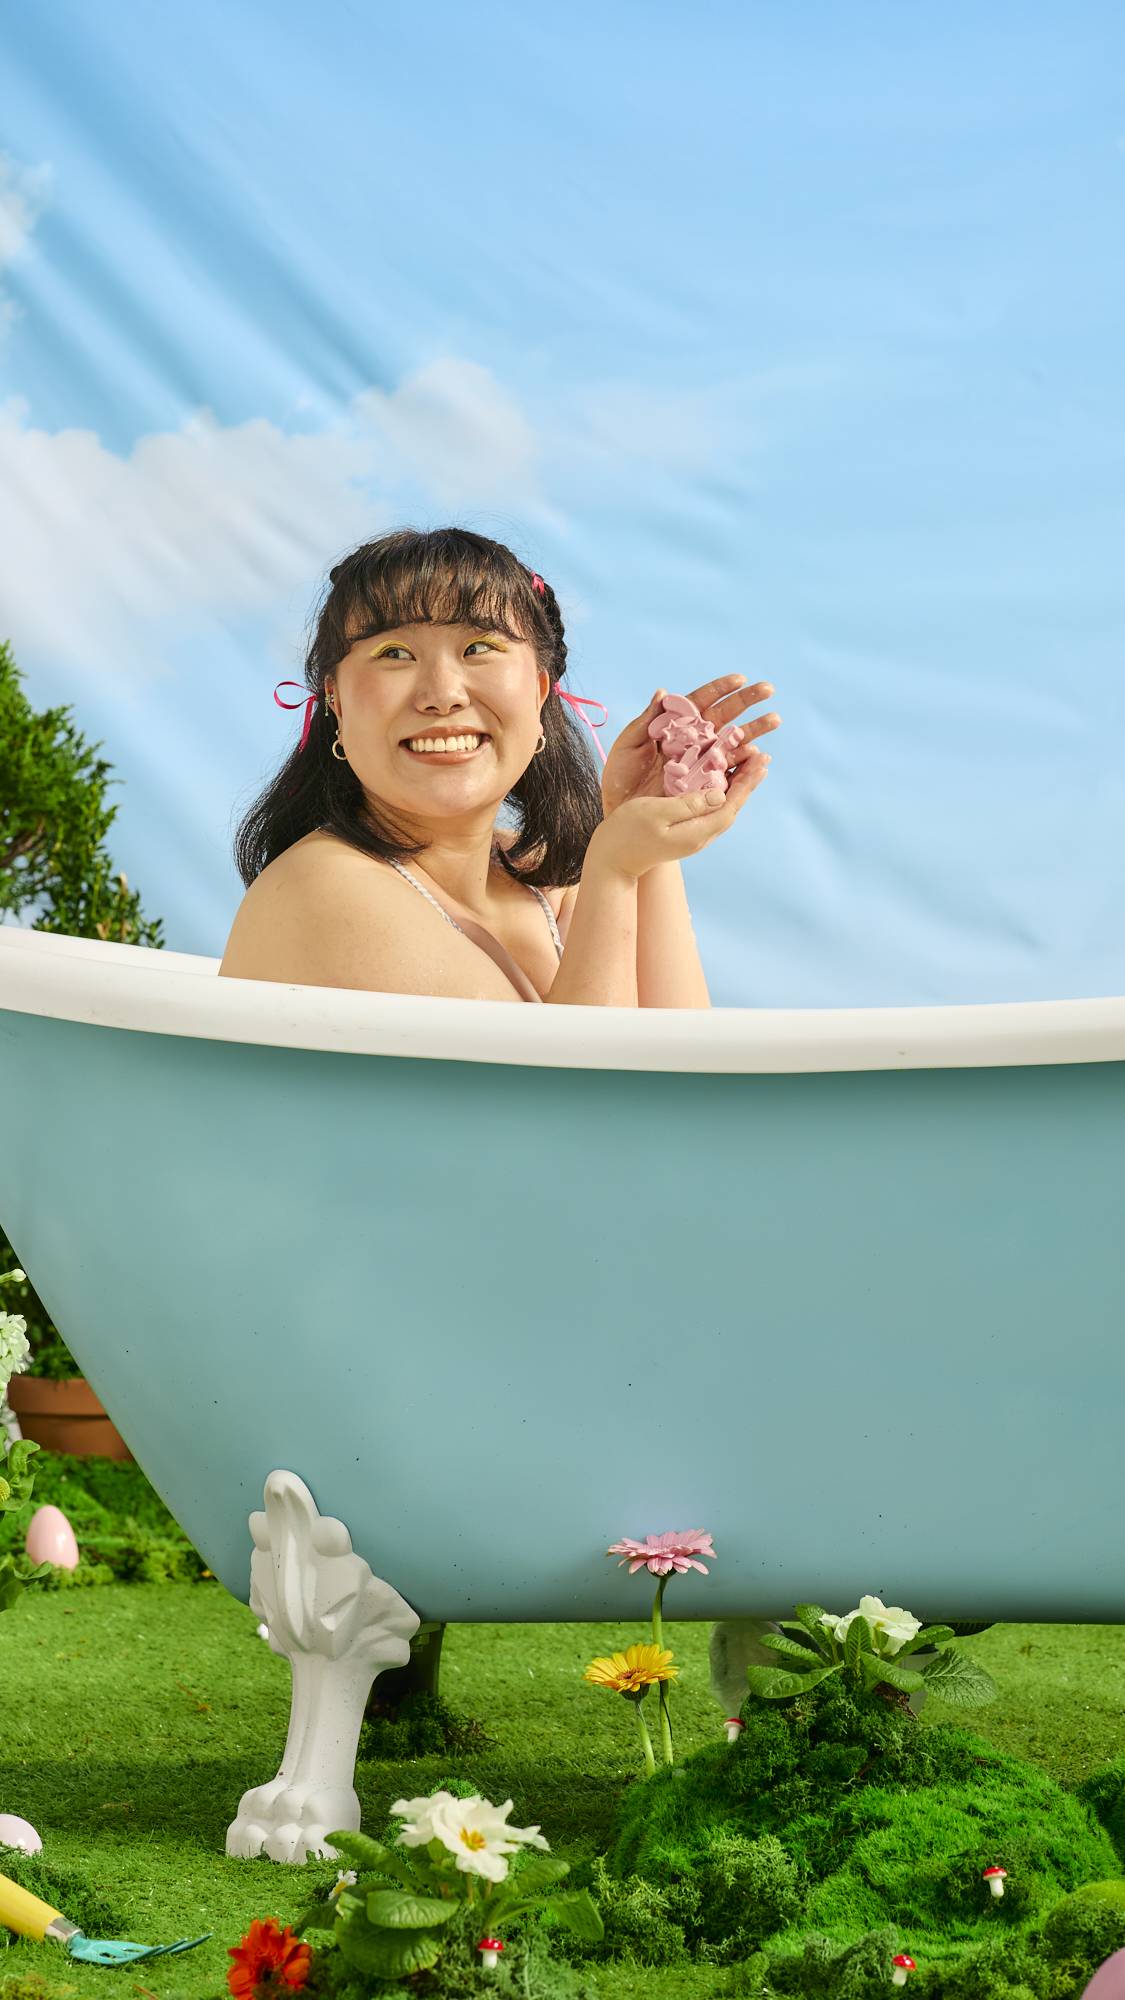 The model is in an outdoor bath under blue skies, surrounded by glass and spring flowers as they smile and hold the Rockstar Rabbit soap with both hands. 